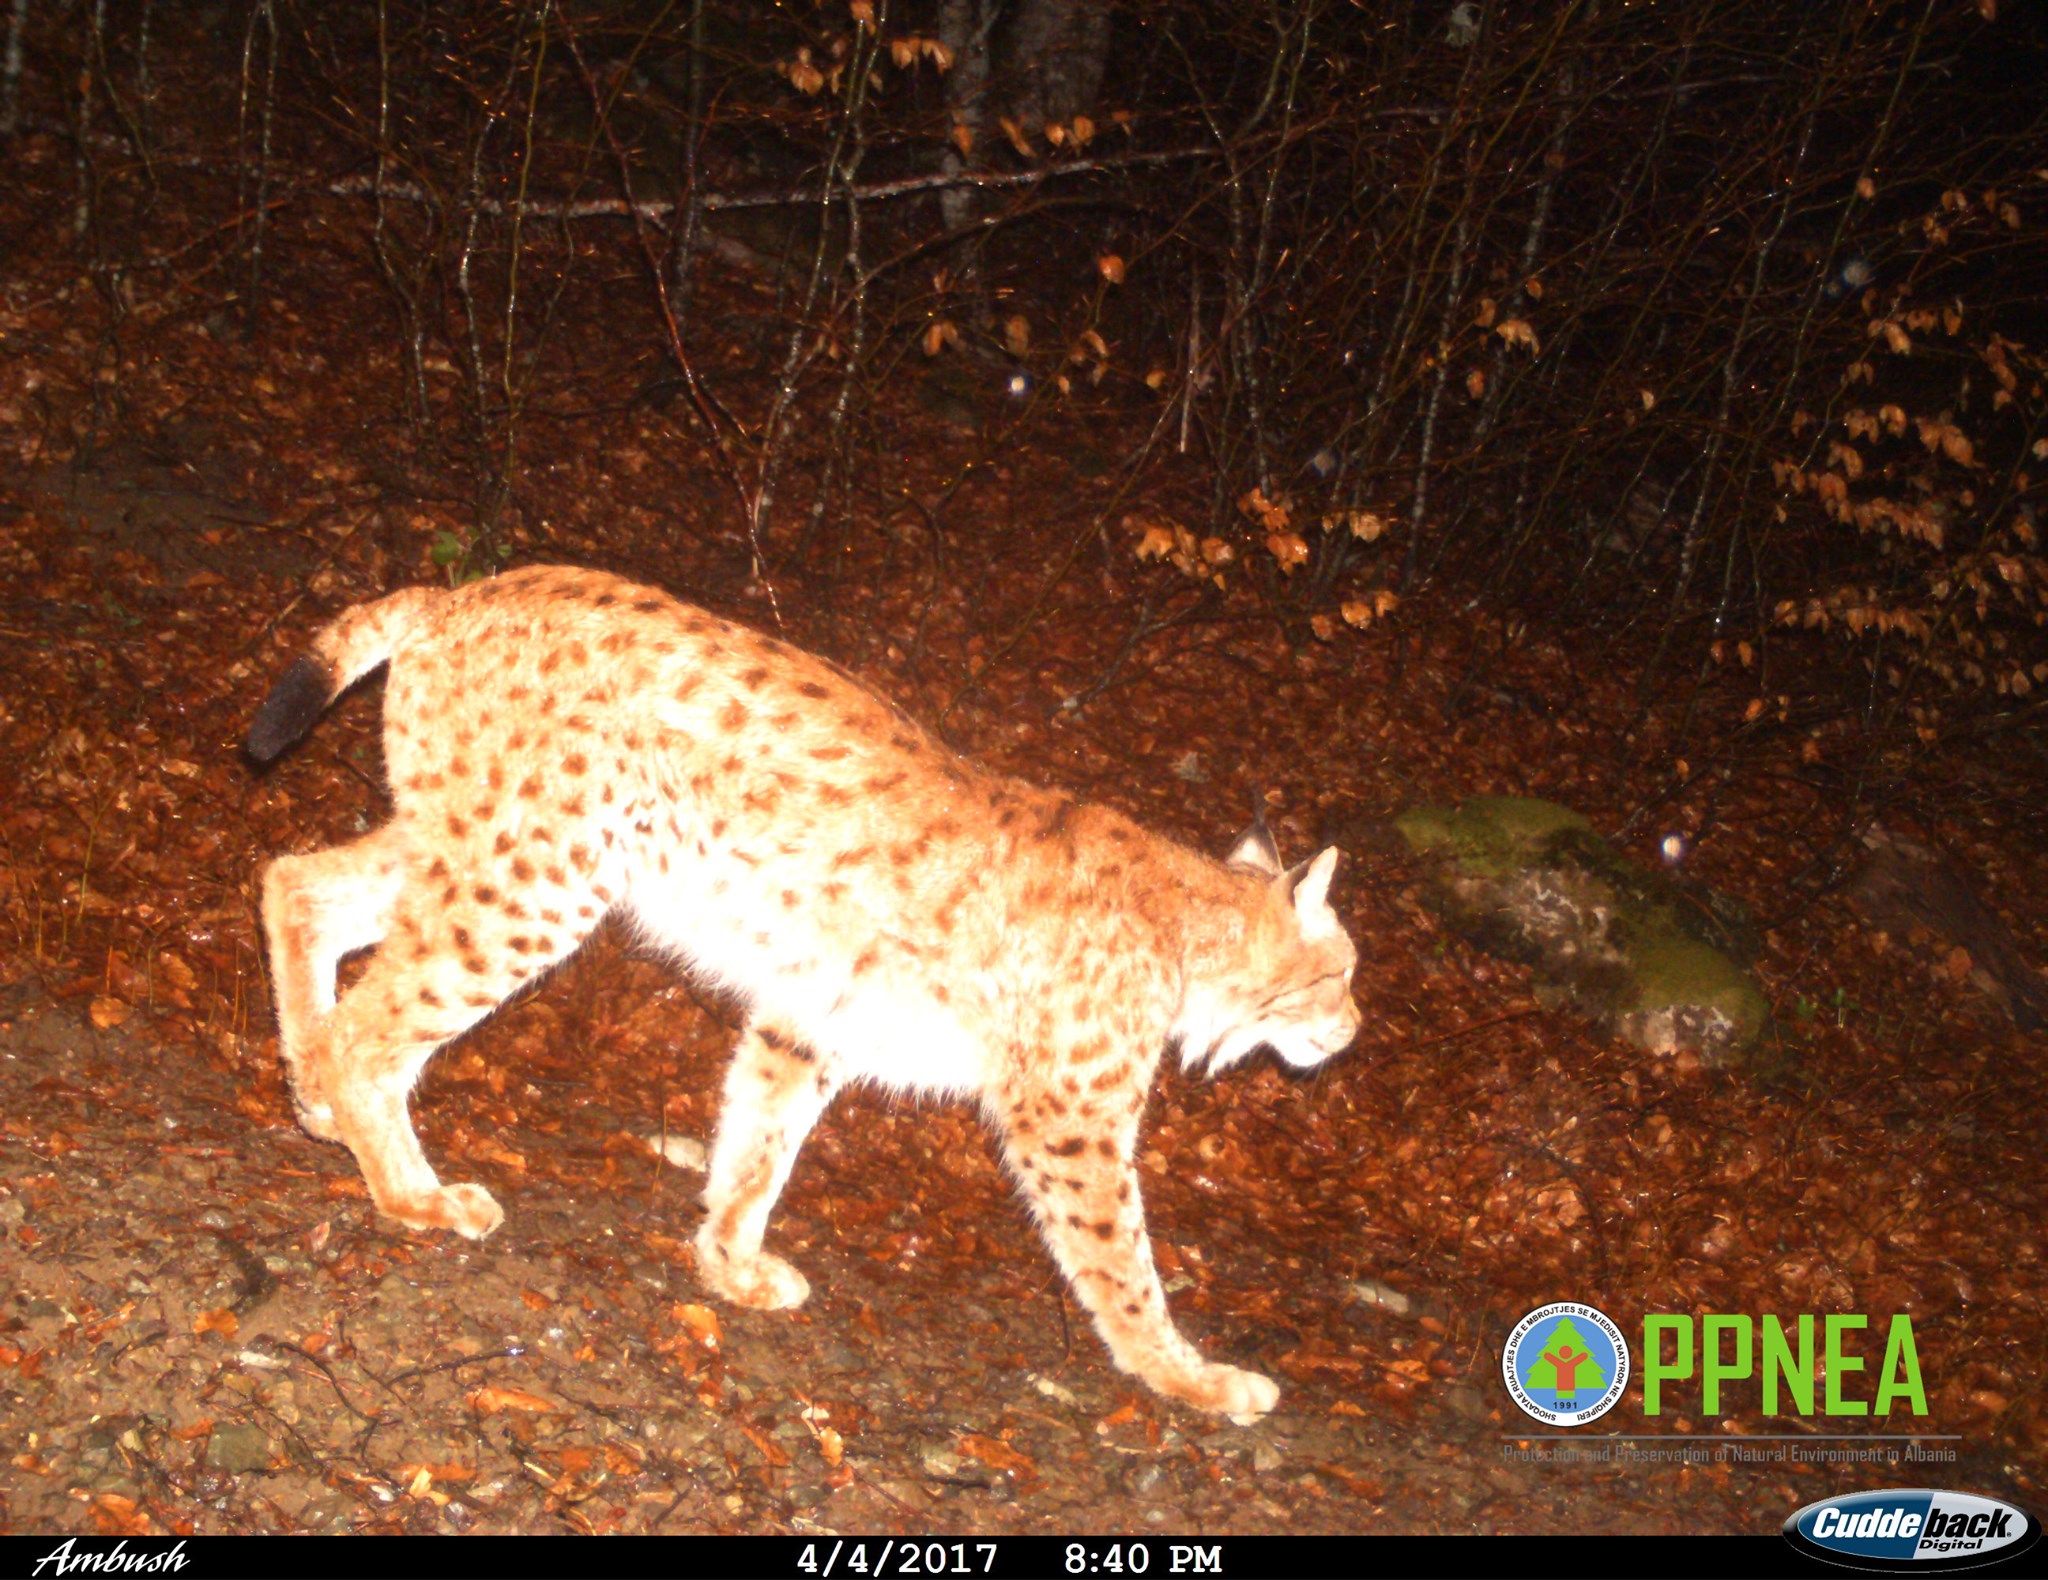 Are you familiar with our work for the critically endangered Balkan lynx?